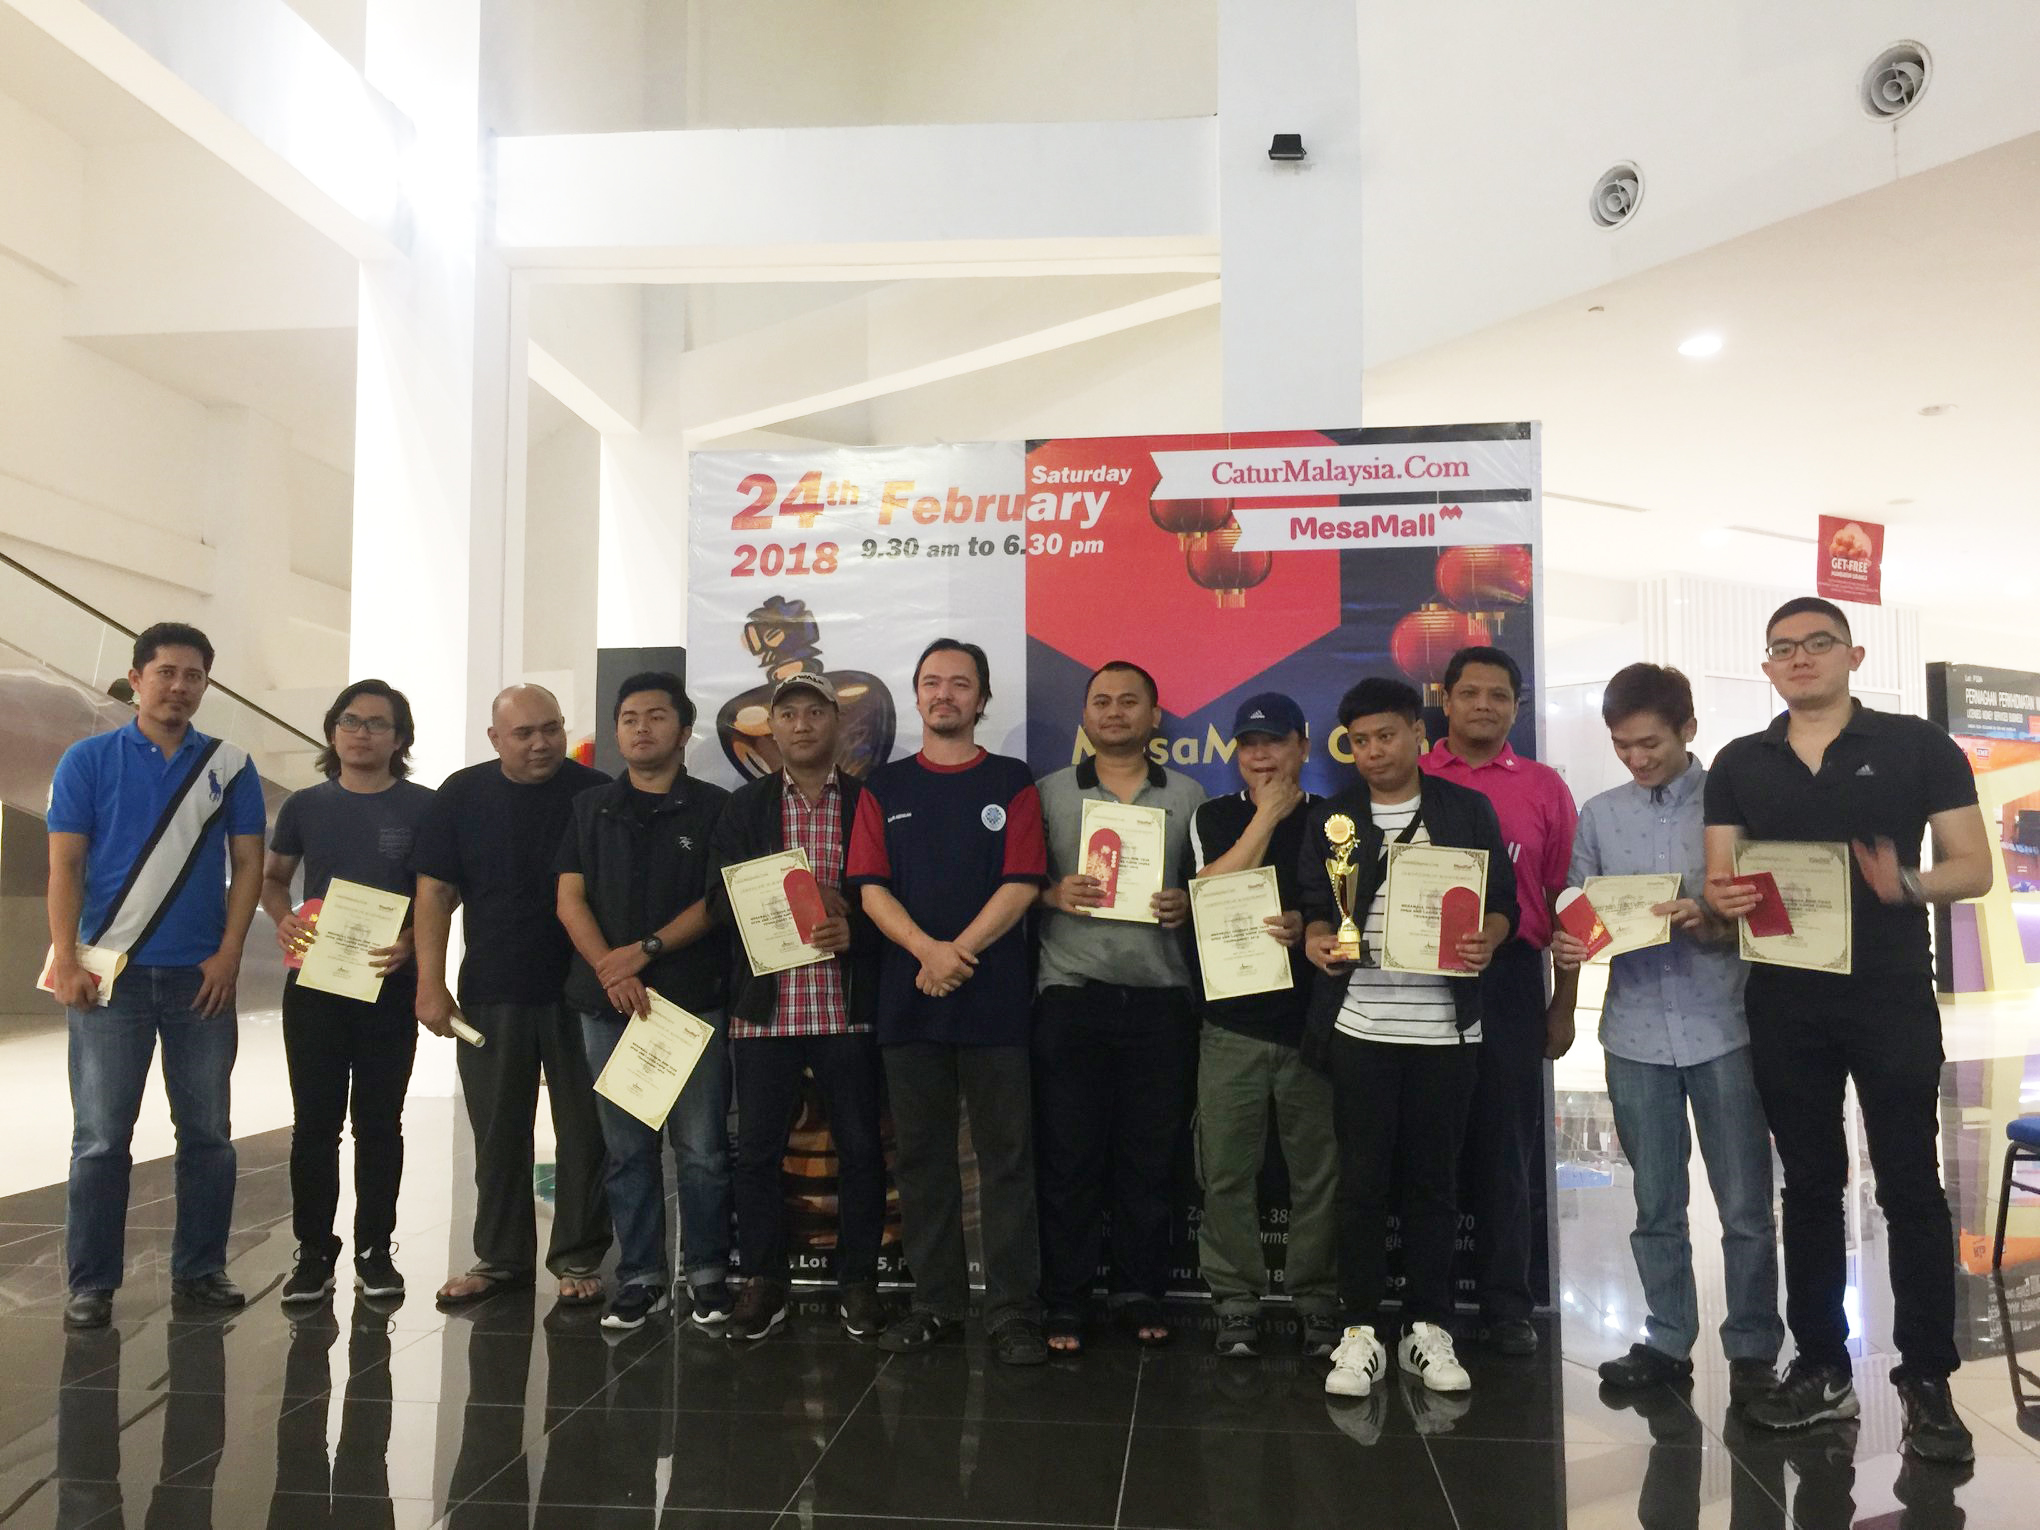 Photo shows FIDE Master (FM) Nelson Villanueva of the Philippines (fourth from right) topped the rapid event of the Mesamall Chinese New Year Open chess tournament held in Nilai, Negeri Sembilan, Malaysia last February 24, 2018.